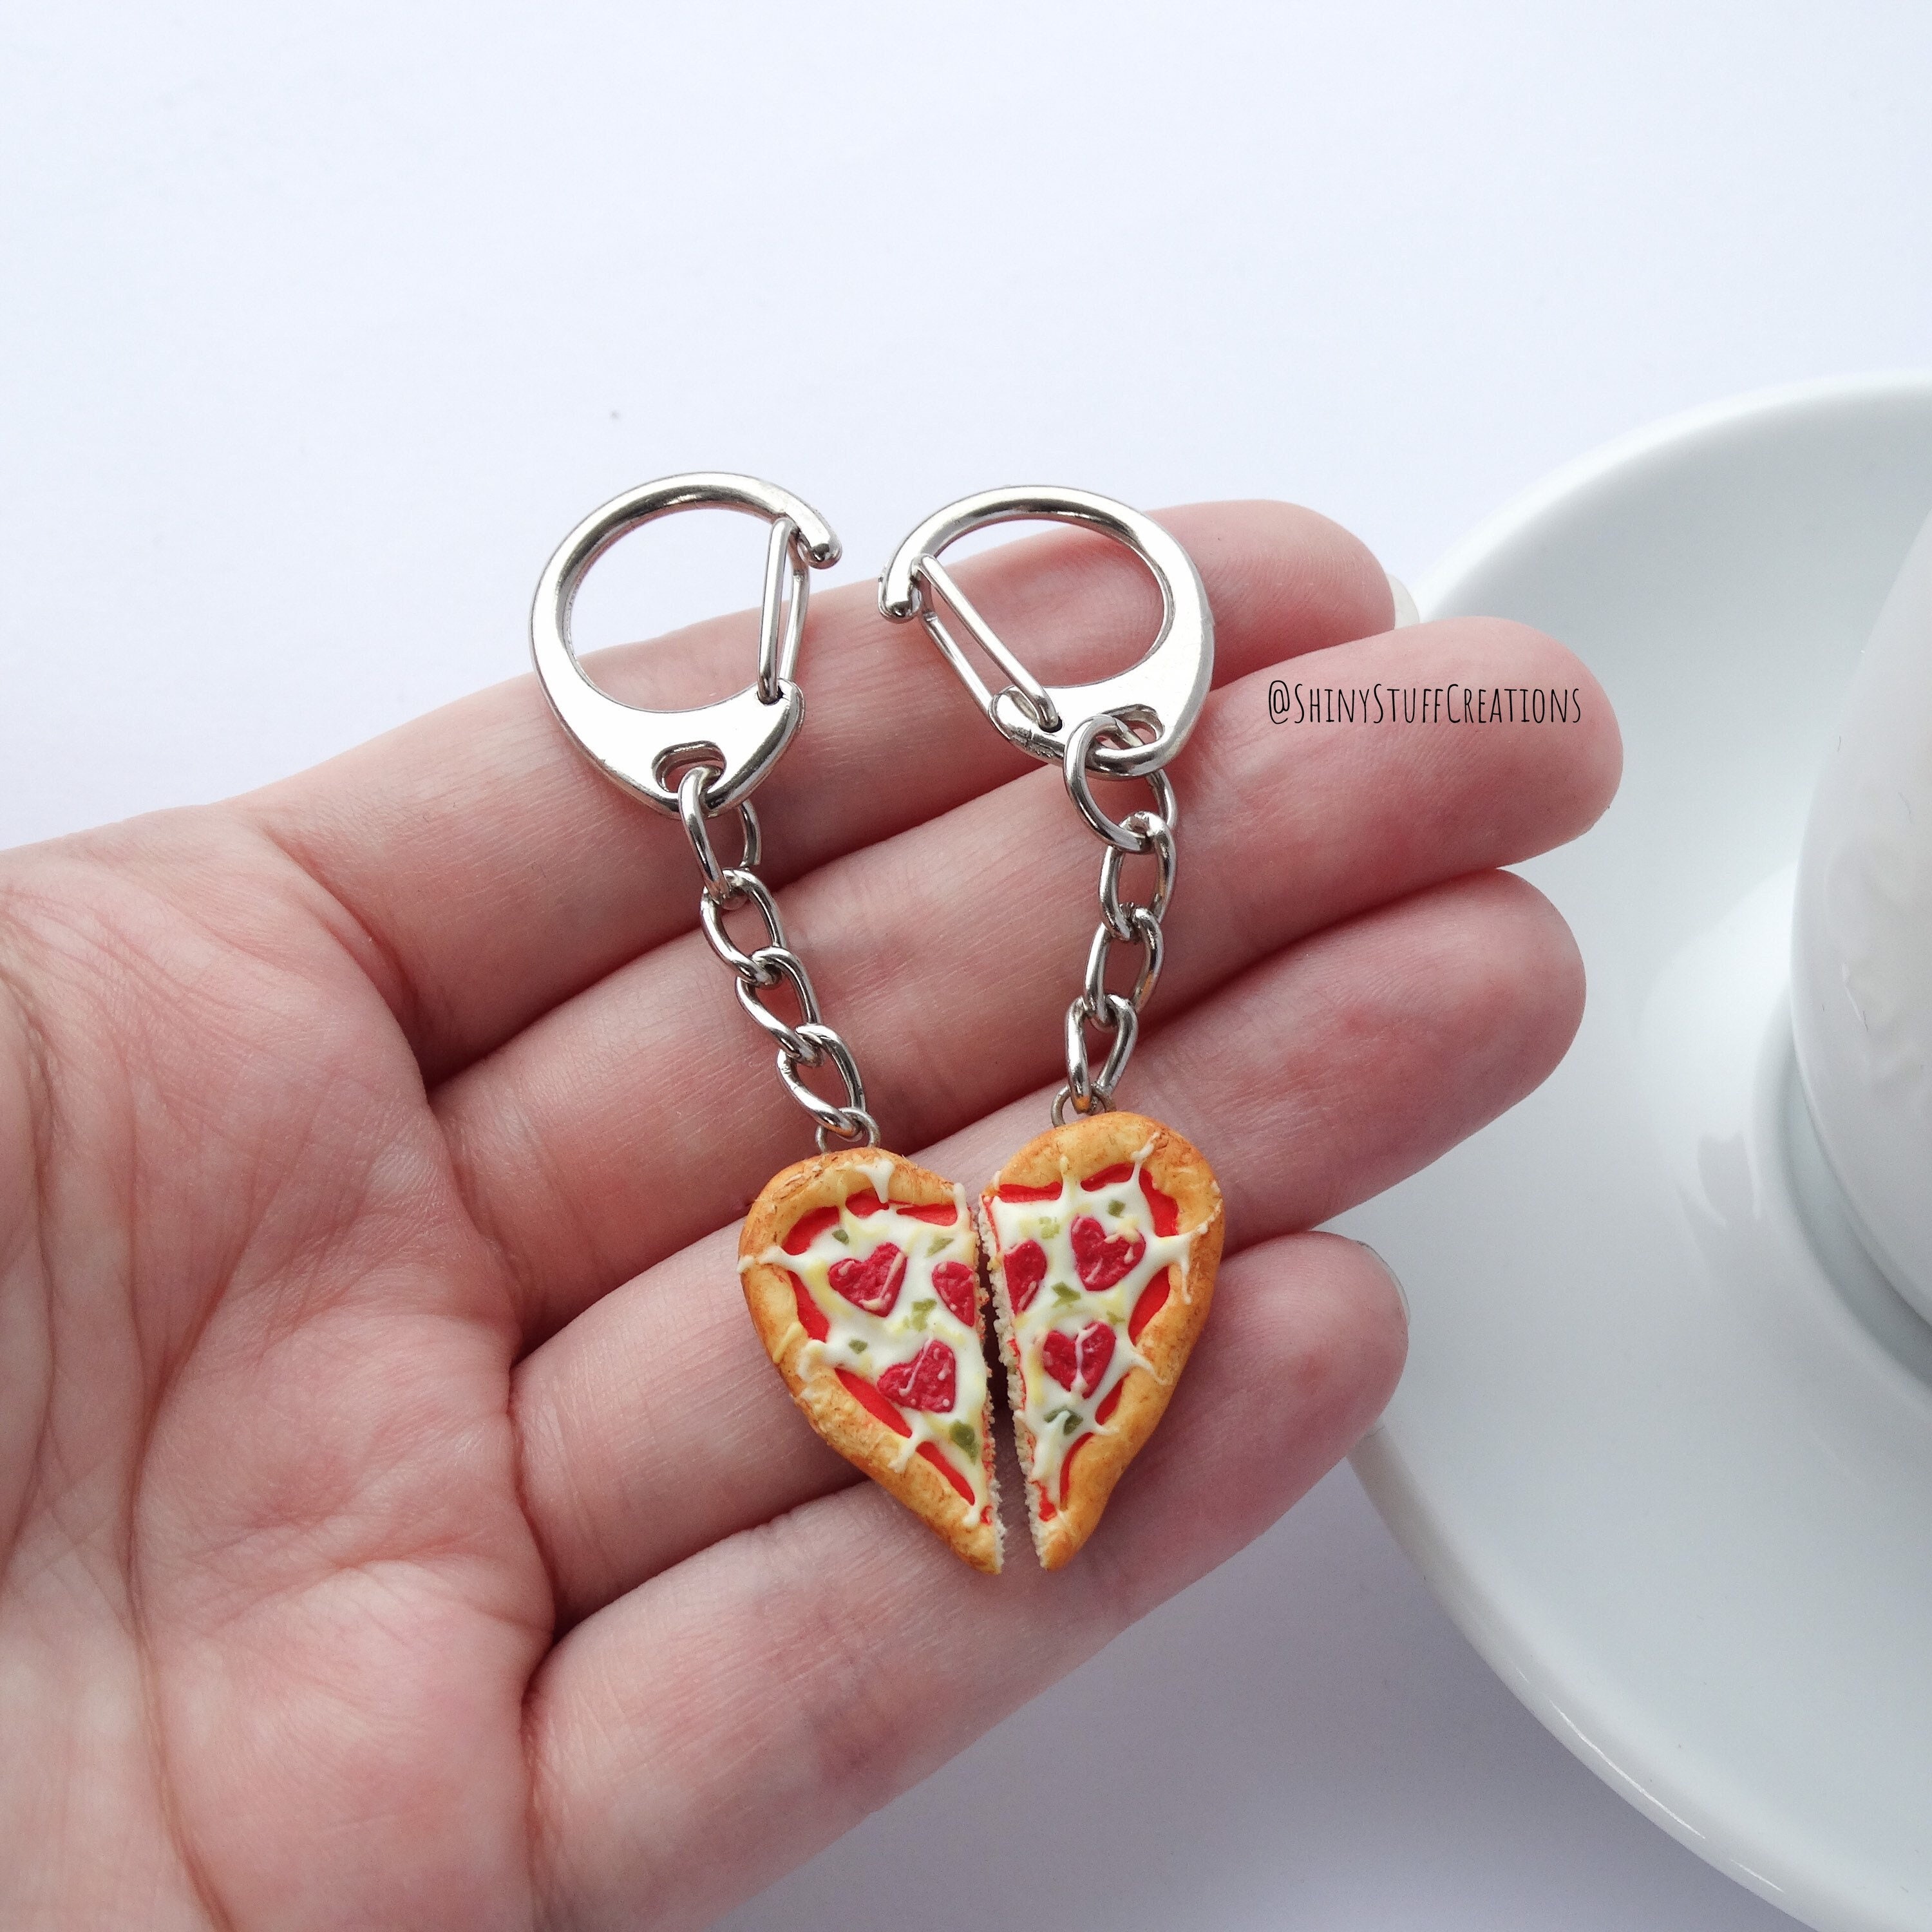 Valentines heart keychain sale – The Sims Shop